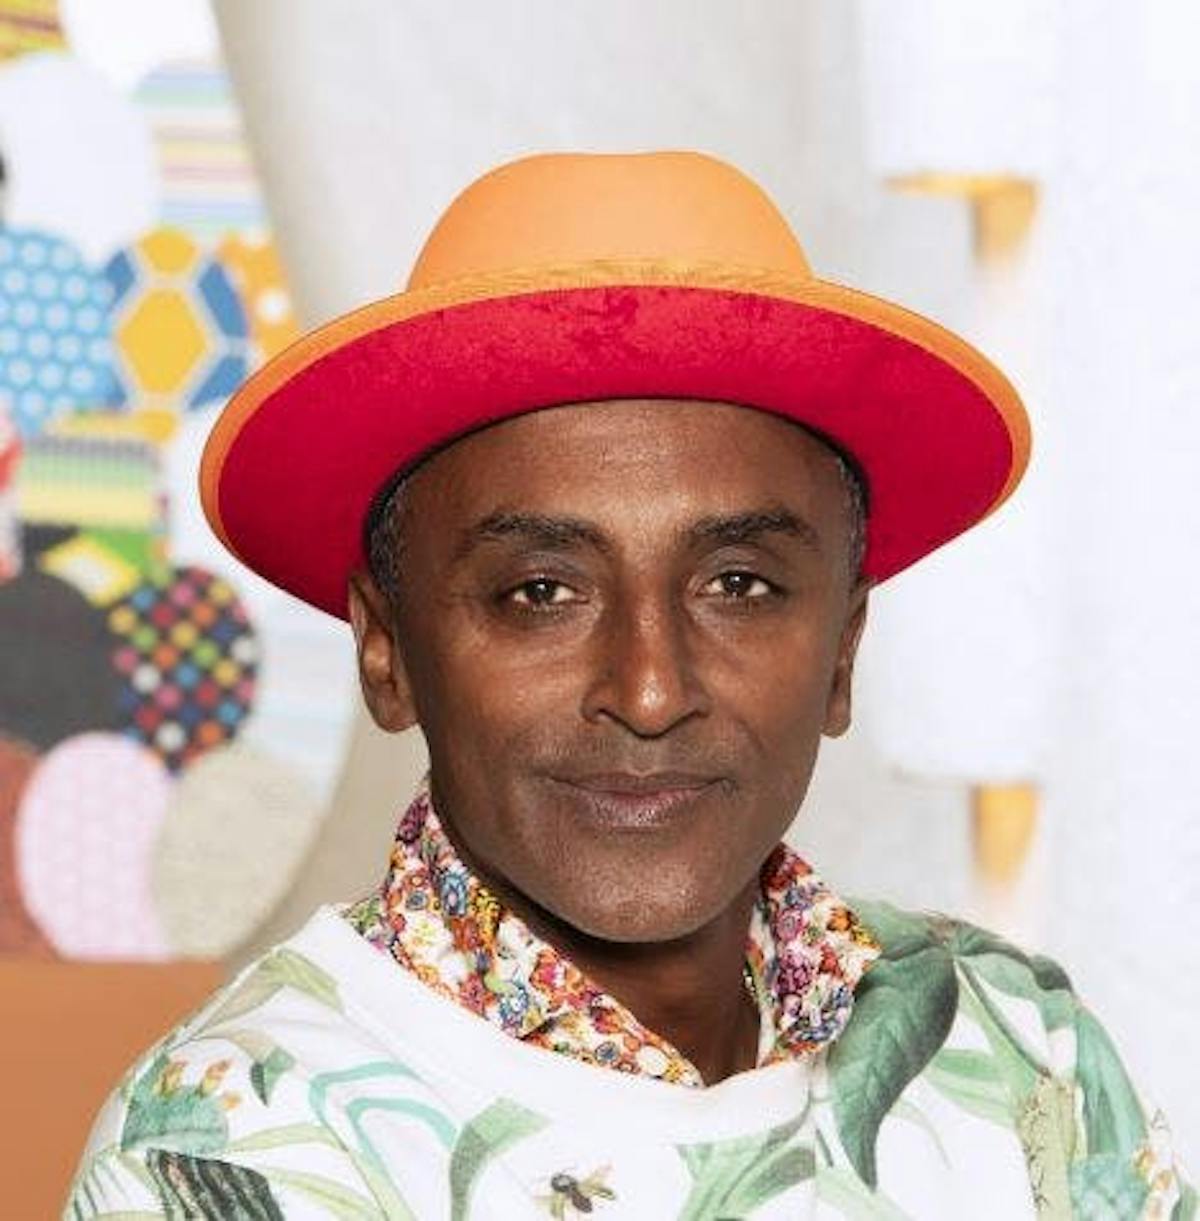 Marcus Samuelsson chef staring at the camera